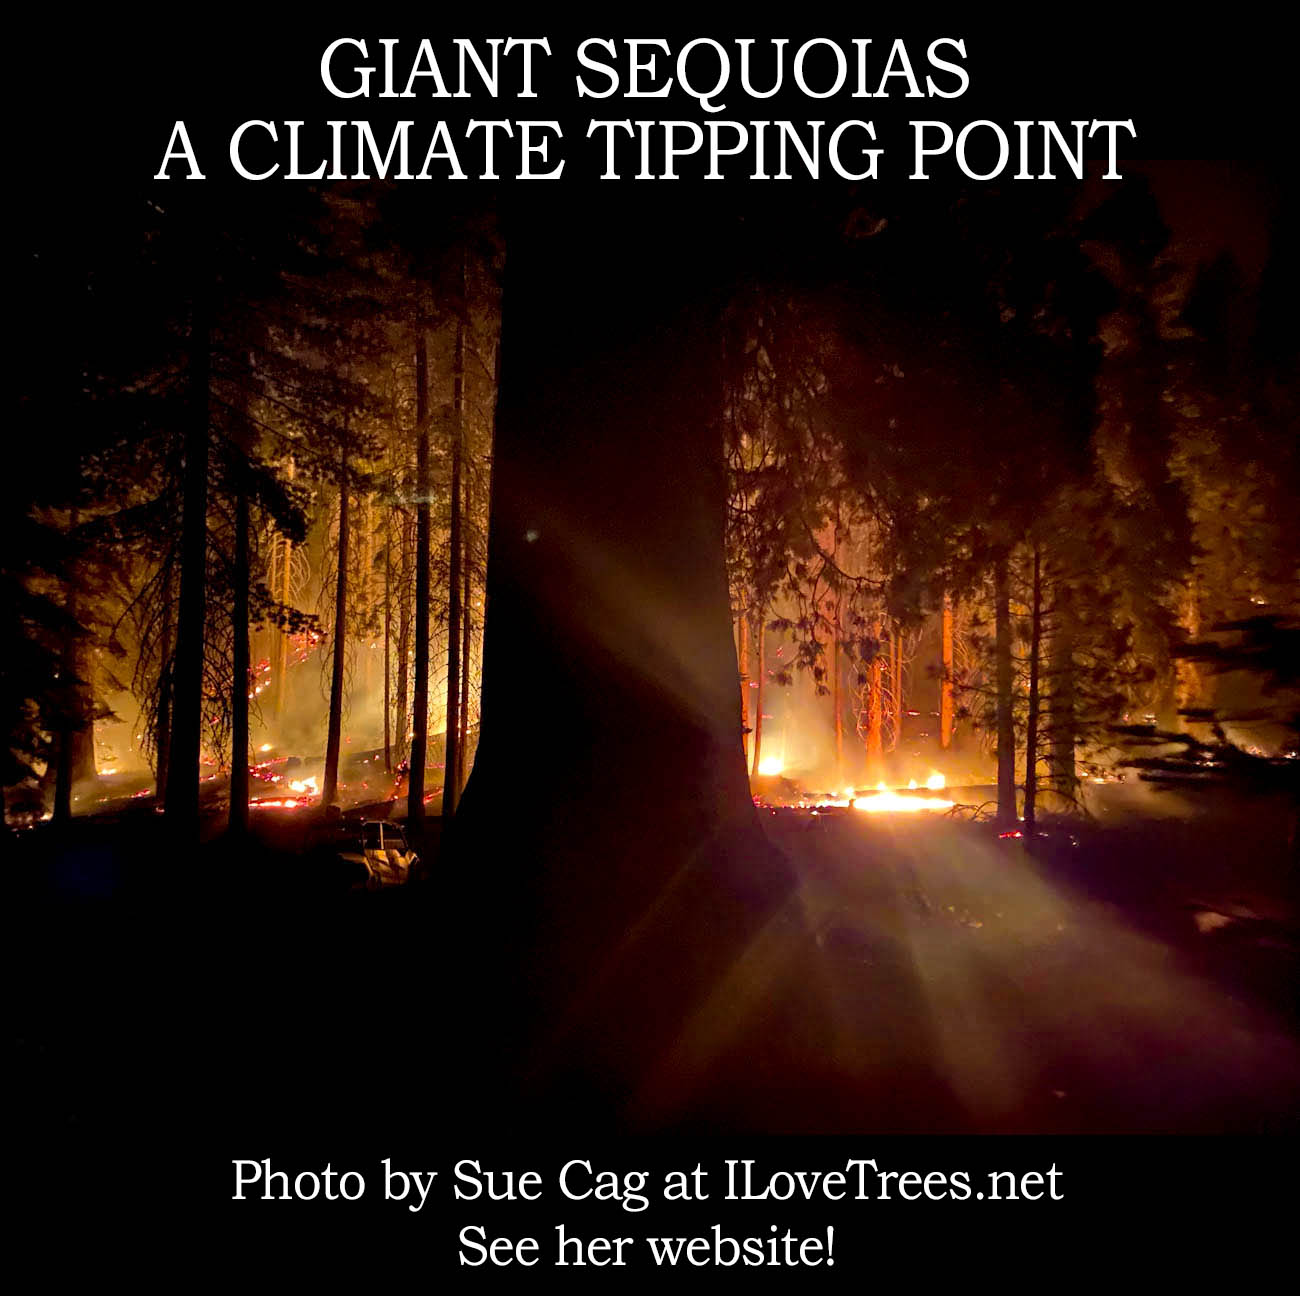 Giant Sequoias: A Tipping Point